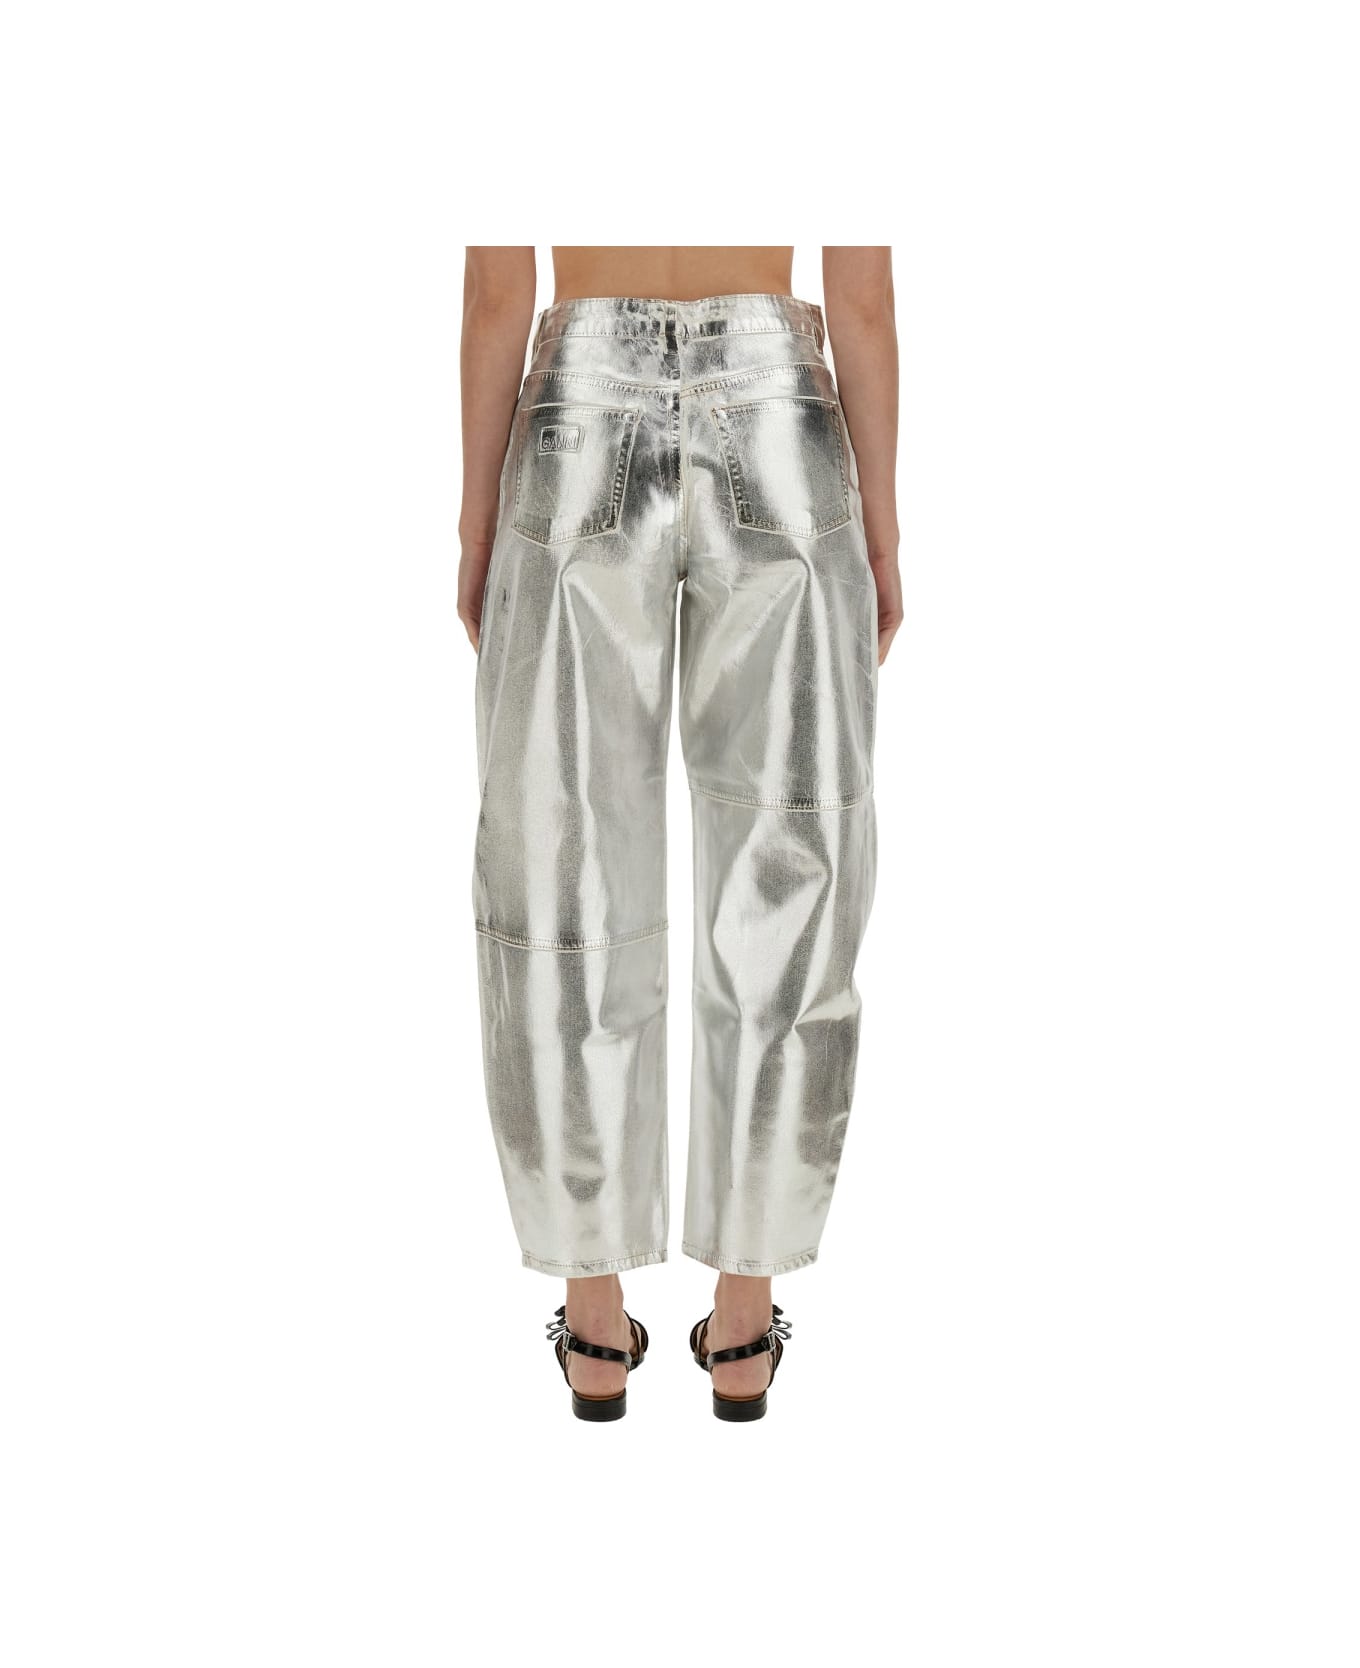 Ganni Jeans Stary - SILVER